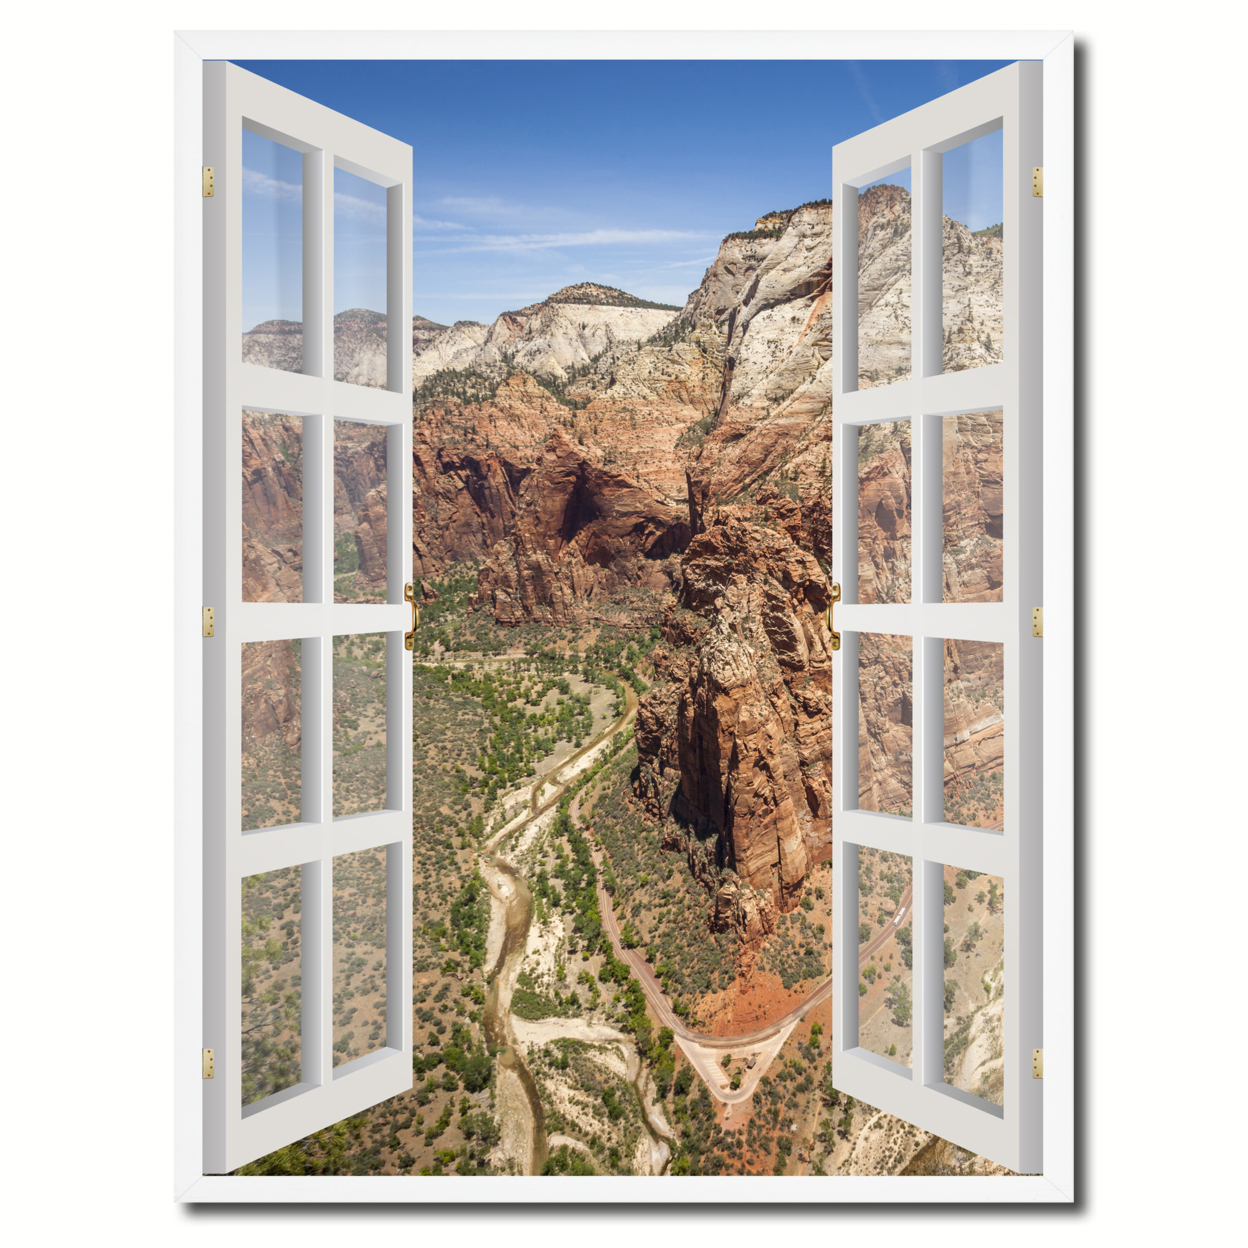 Aerial View Zion Park Picture 3D French Window Canvas Print Gifts Home DÃ©cor Wall Frames - 13" x 17"